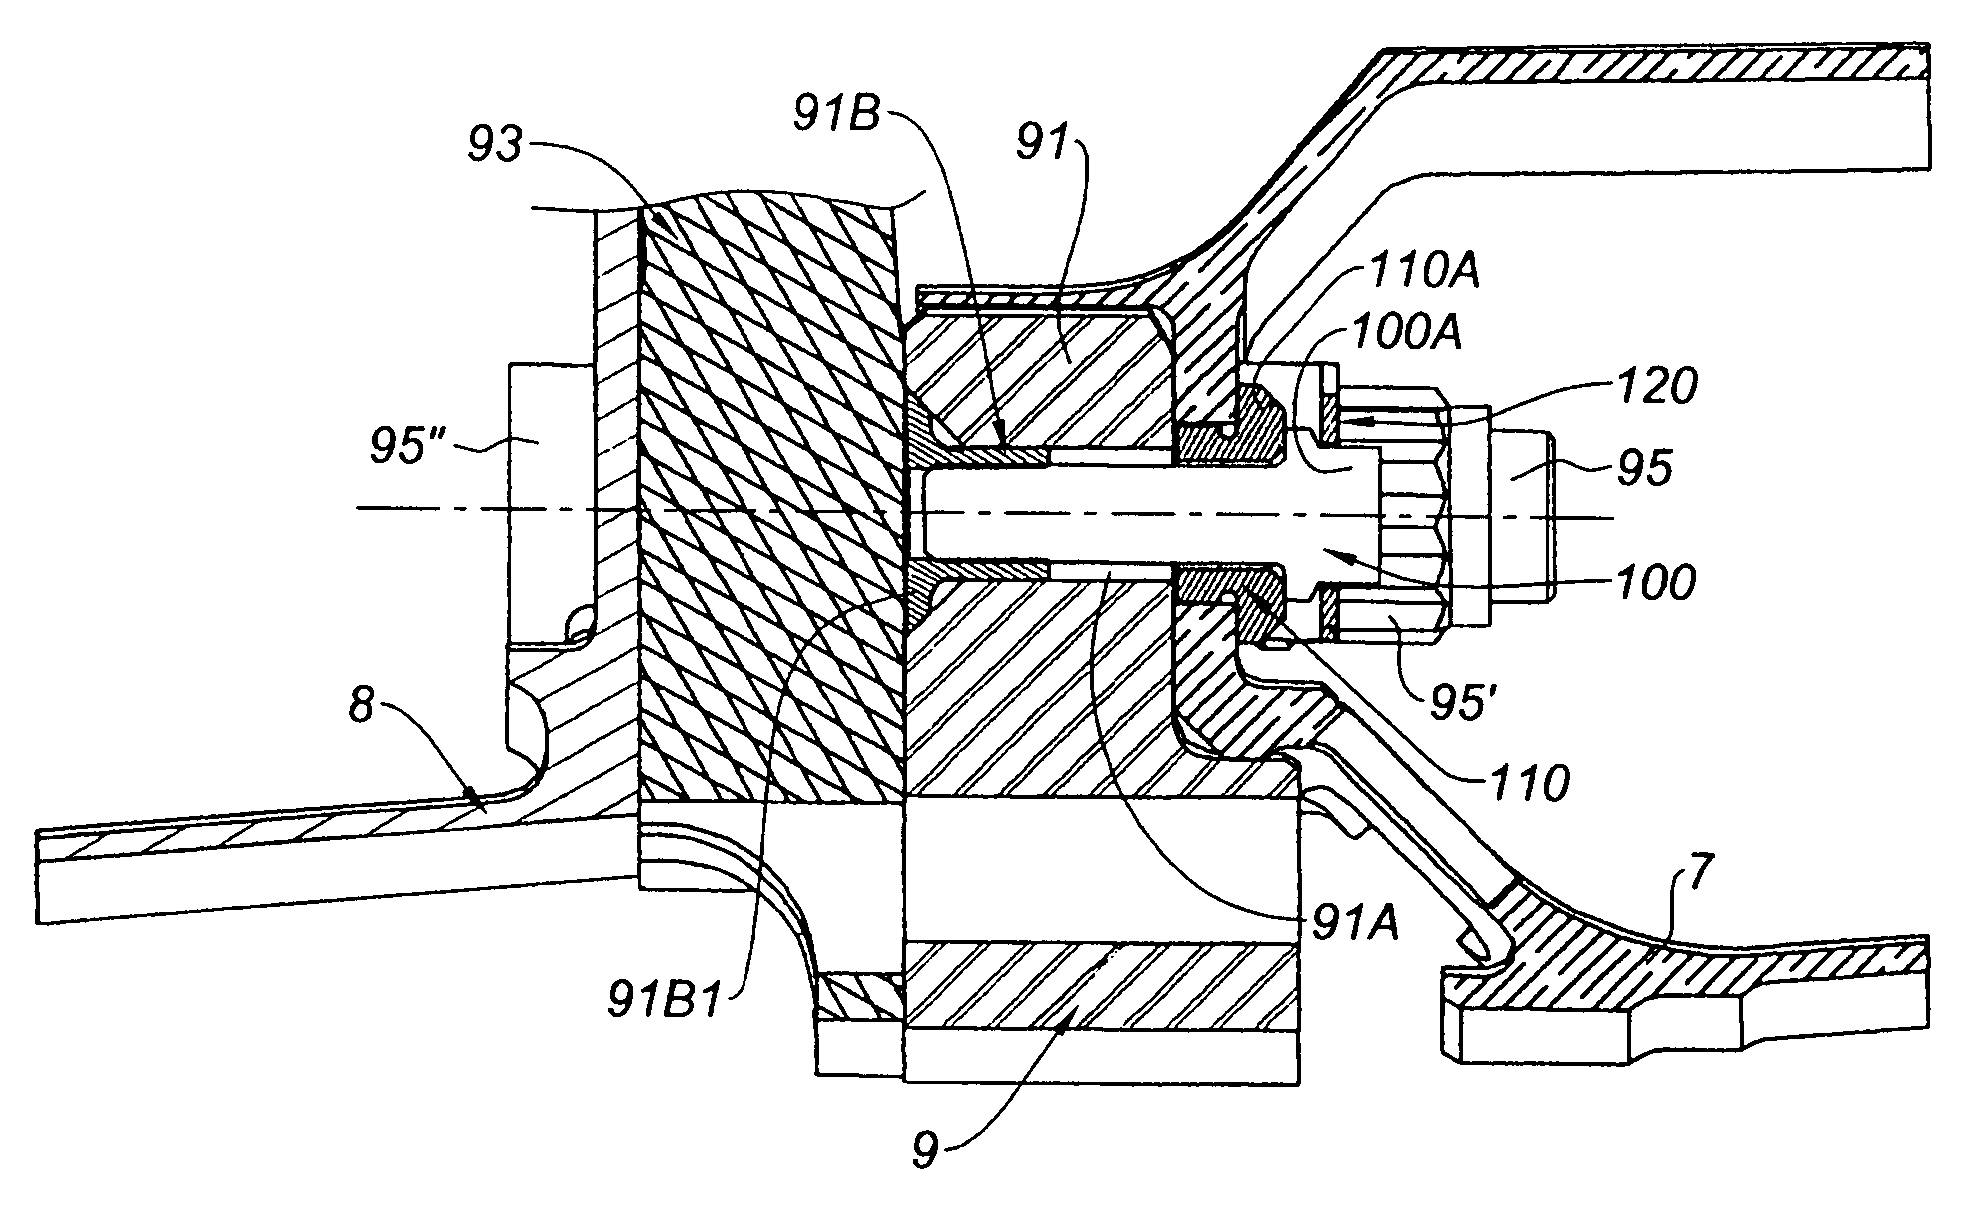 Assembly of a labyrinthe seal support on a turbine machine rotor